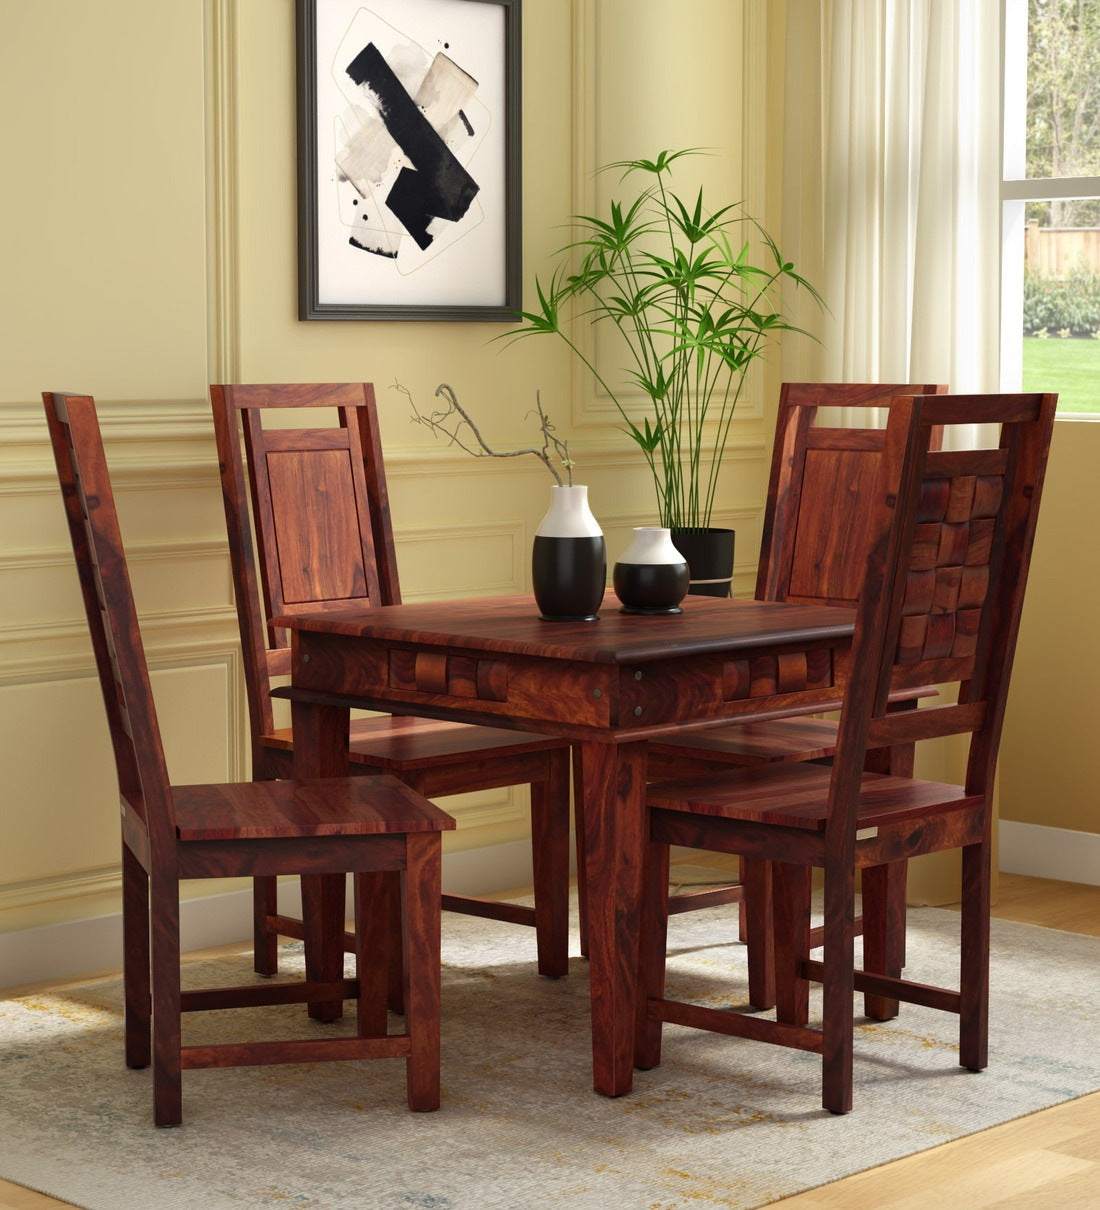 Niware Solid Wood 4 Seater Dining Table Set for Home - Rajwada Furnish